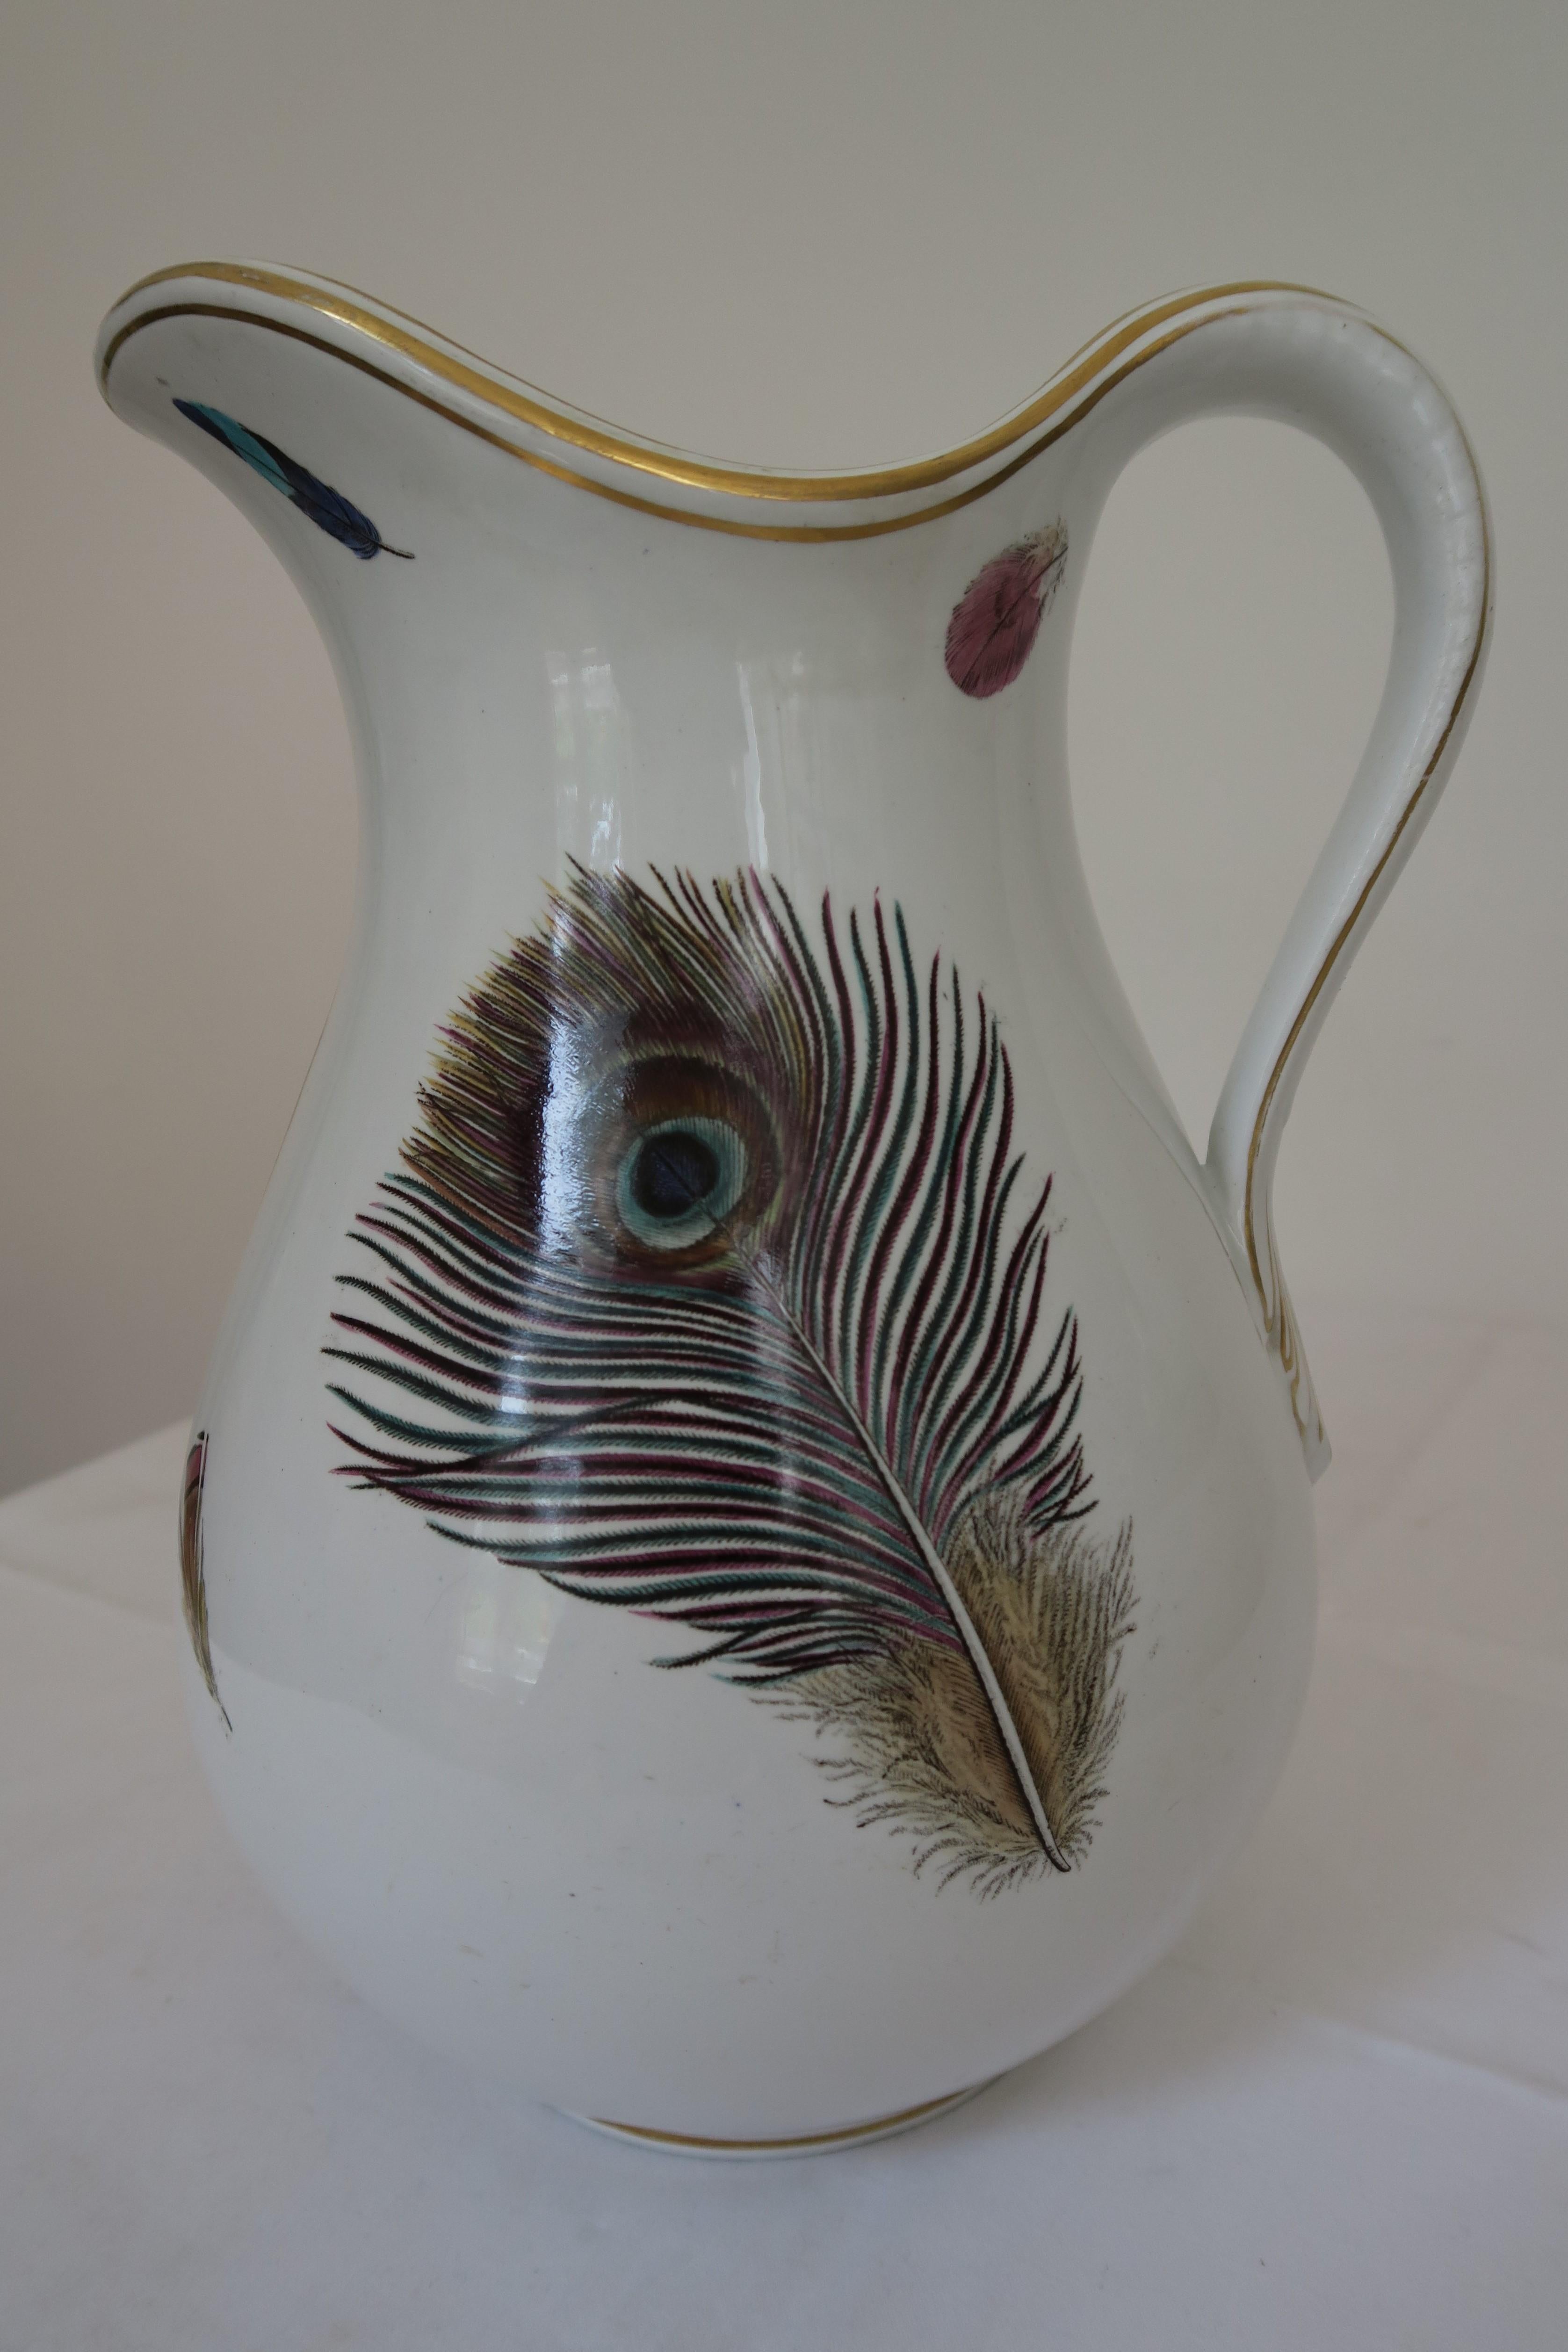 Late Victorian 1880 Minton Porcelain Pitcher with Feather Motif